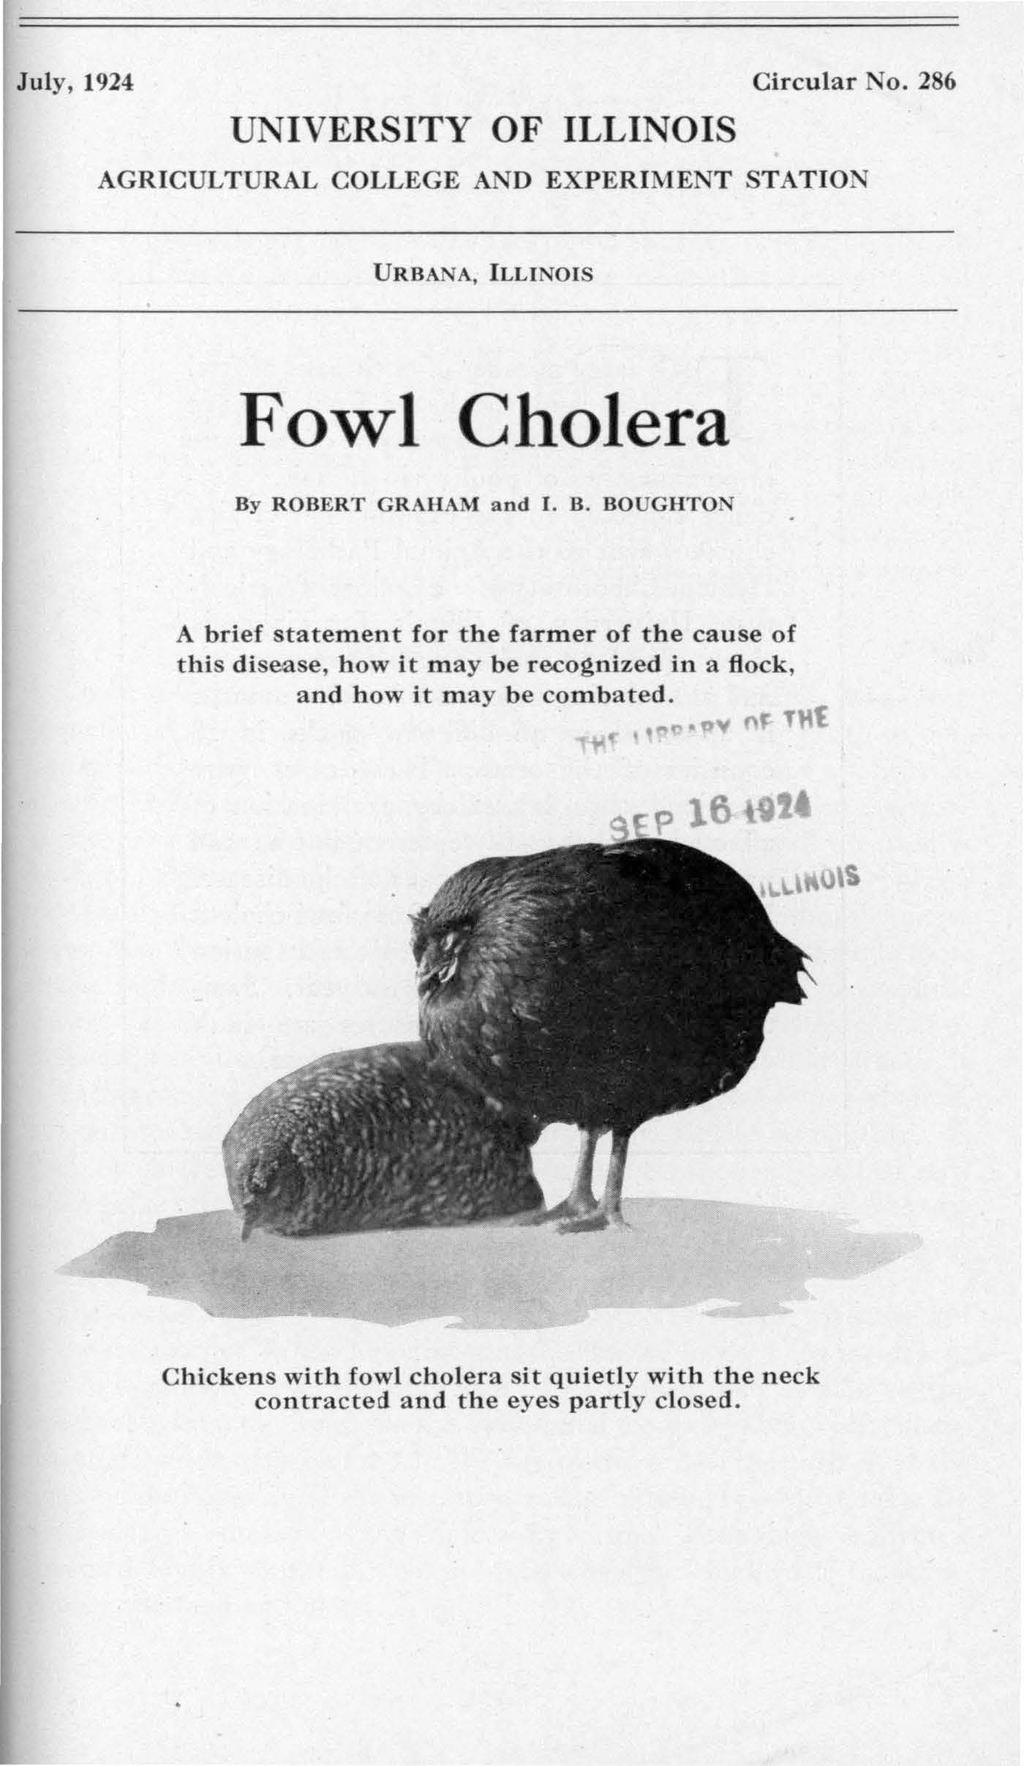 July, 1924 Circular No. 286 UNIVERSITY OF ILLINOIS AGRICULTURAL COLLEGE AND EXPERIMENT STATION URBANA, ILLINOIS Fowl Cholera By